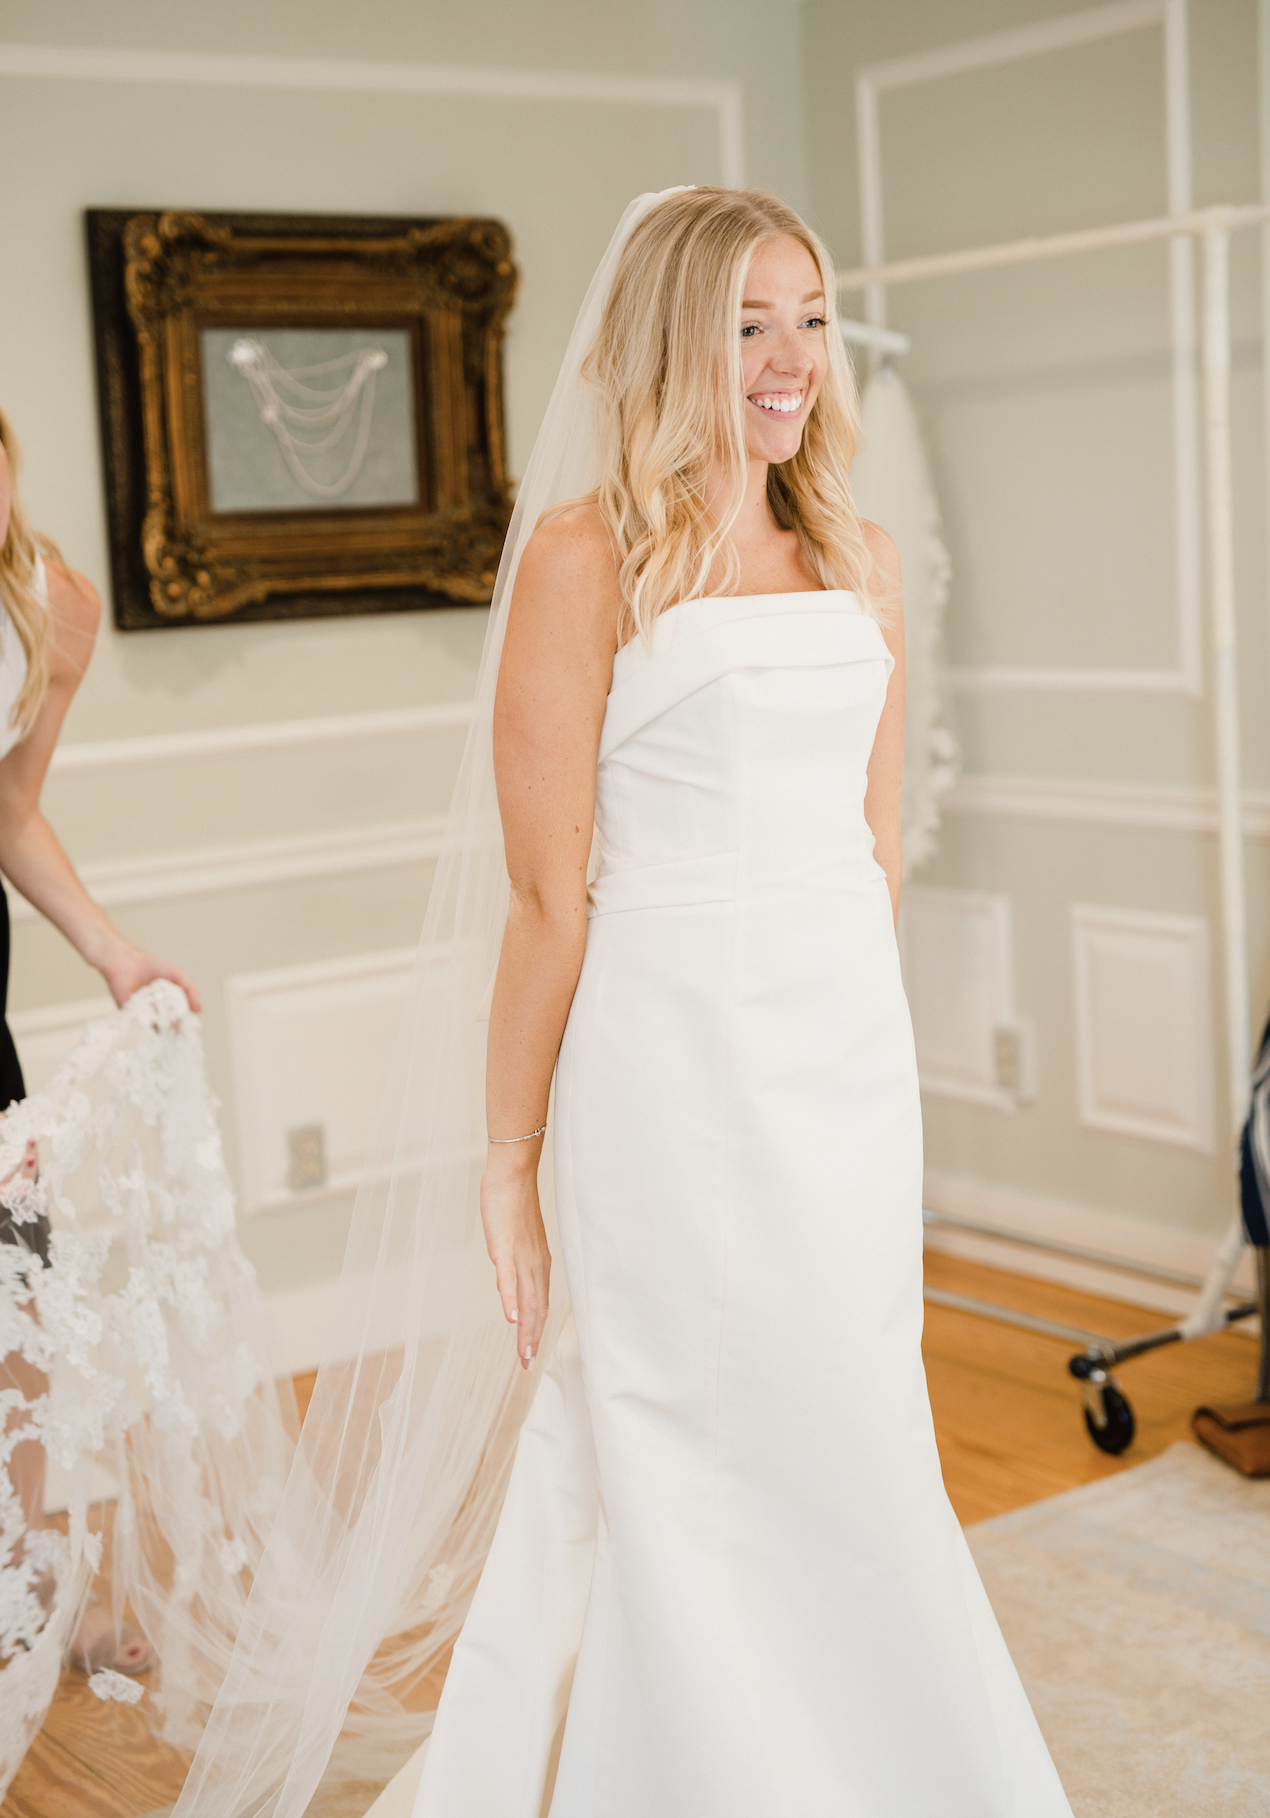 5 Wedding Dress Shopping Tips for your First Bridal Appointment Image